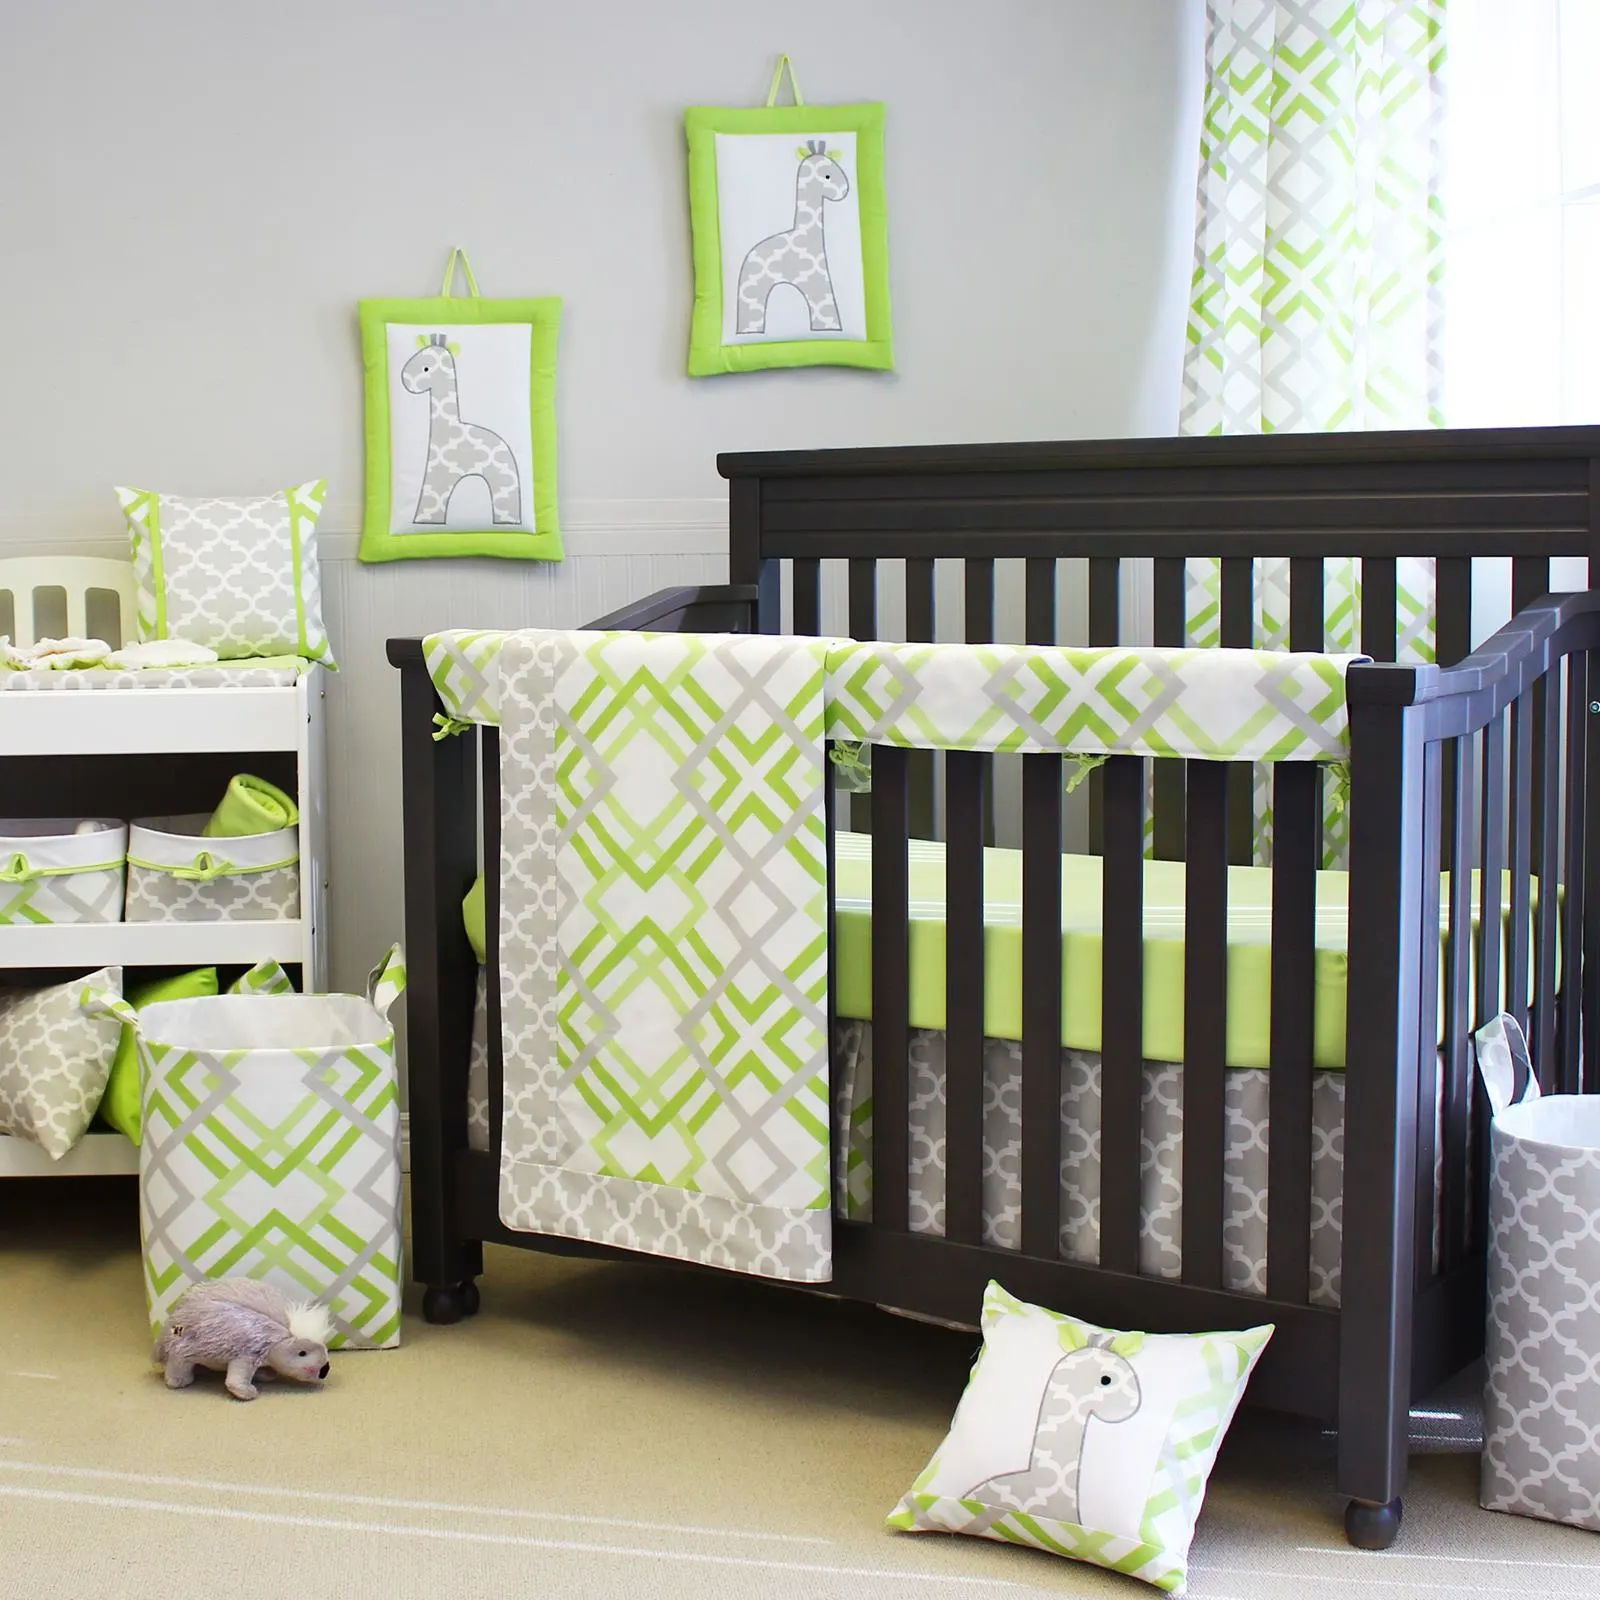 Green and Gray Baby Bedding from Sweet Kyla